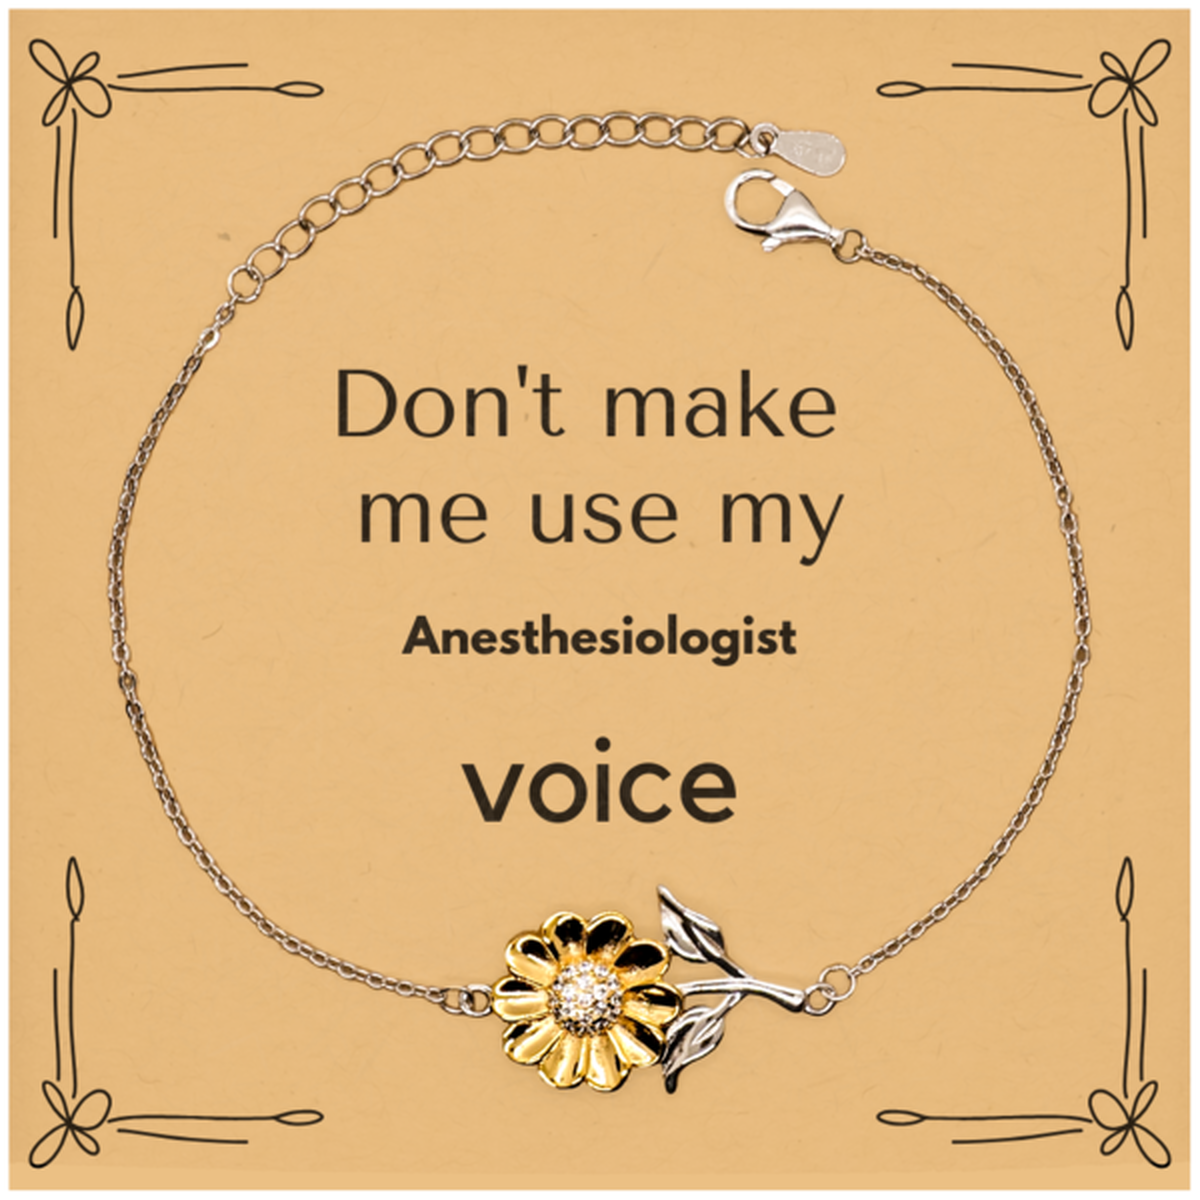 Don't make me use my Anesthesiologist voice, Sarcasm Anesthesiologist Card Gifts, Christmas Anesthesiologist Sunflower Bracelet Birthday Unique Gifts For Anesthesiologist Coworkers, Men, Women, Colleague, Friends